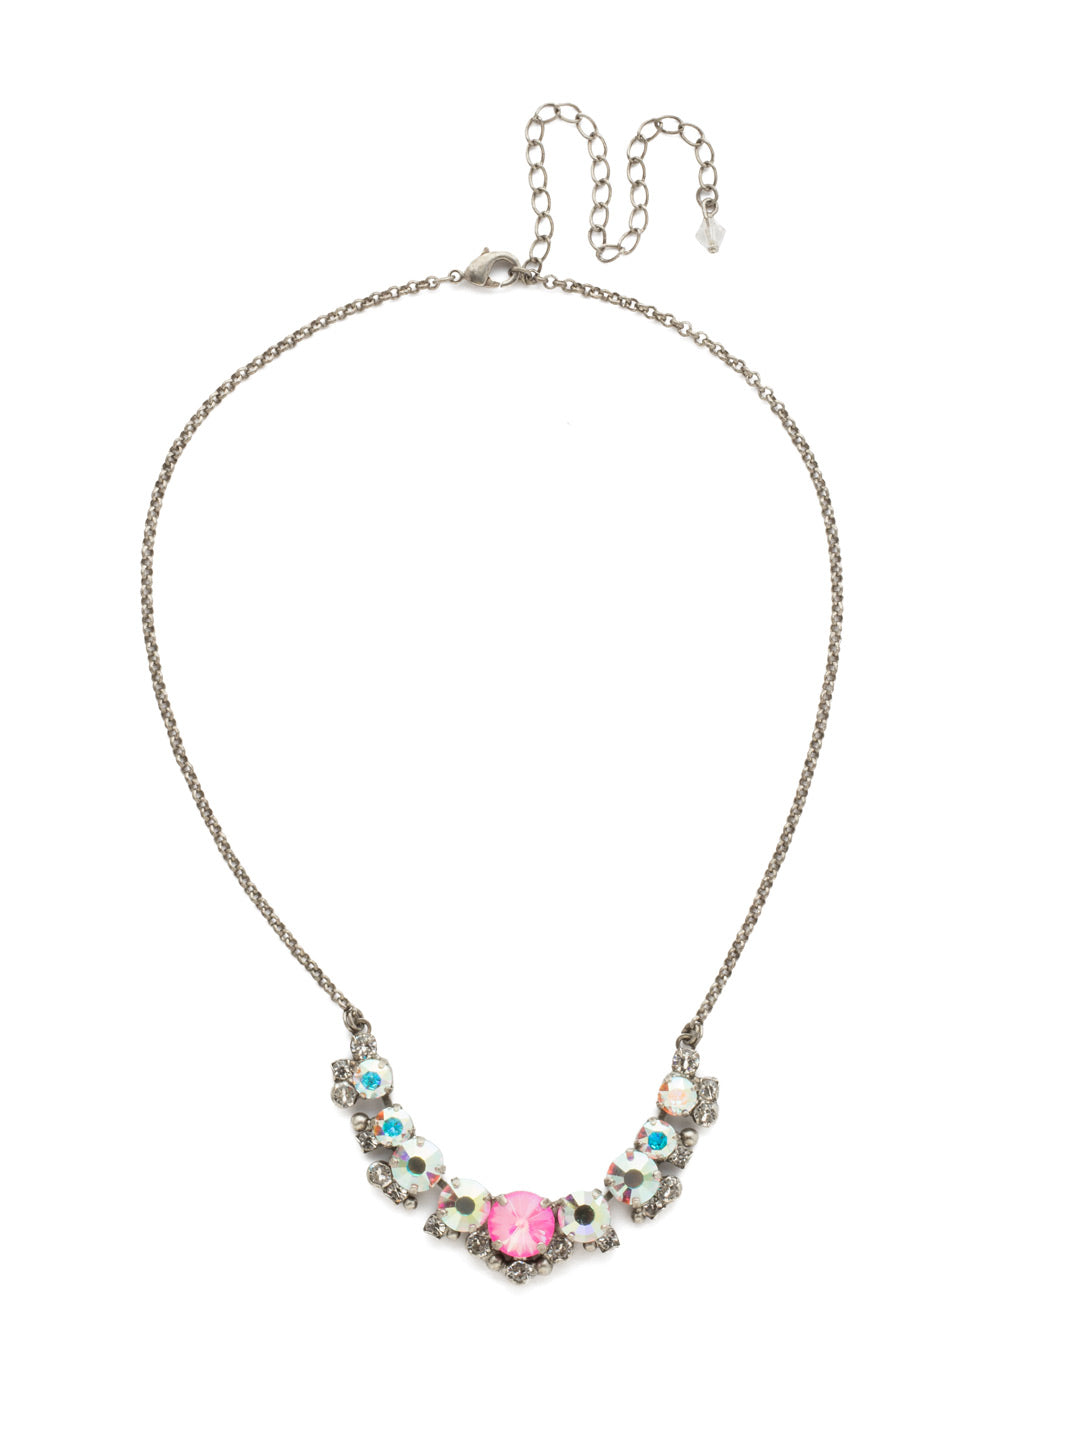 Acacia Necklace - NDG81ASPMU - A half-line necklace featuring round cut crystals in a decorative setting. From Sorrelli's Pink Mutiny collection in our Antique Silver-tone finish.